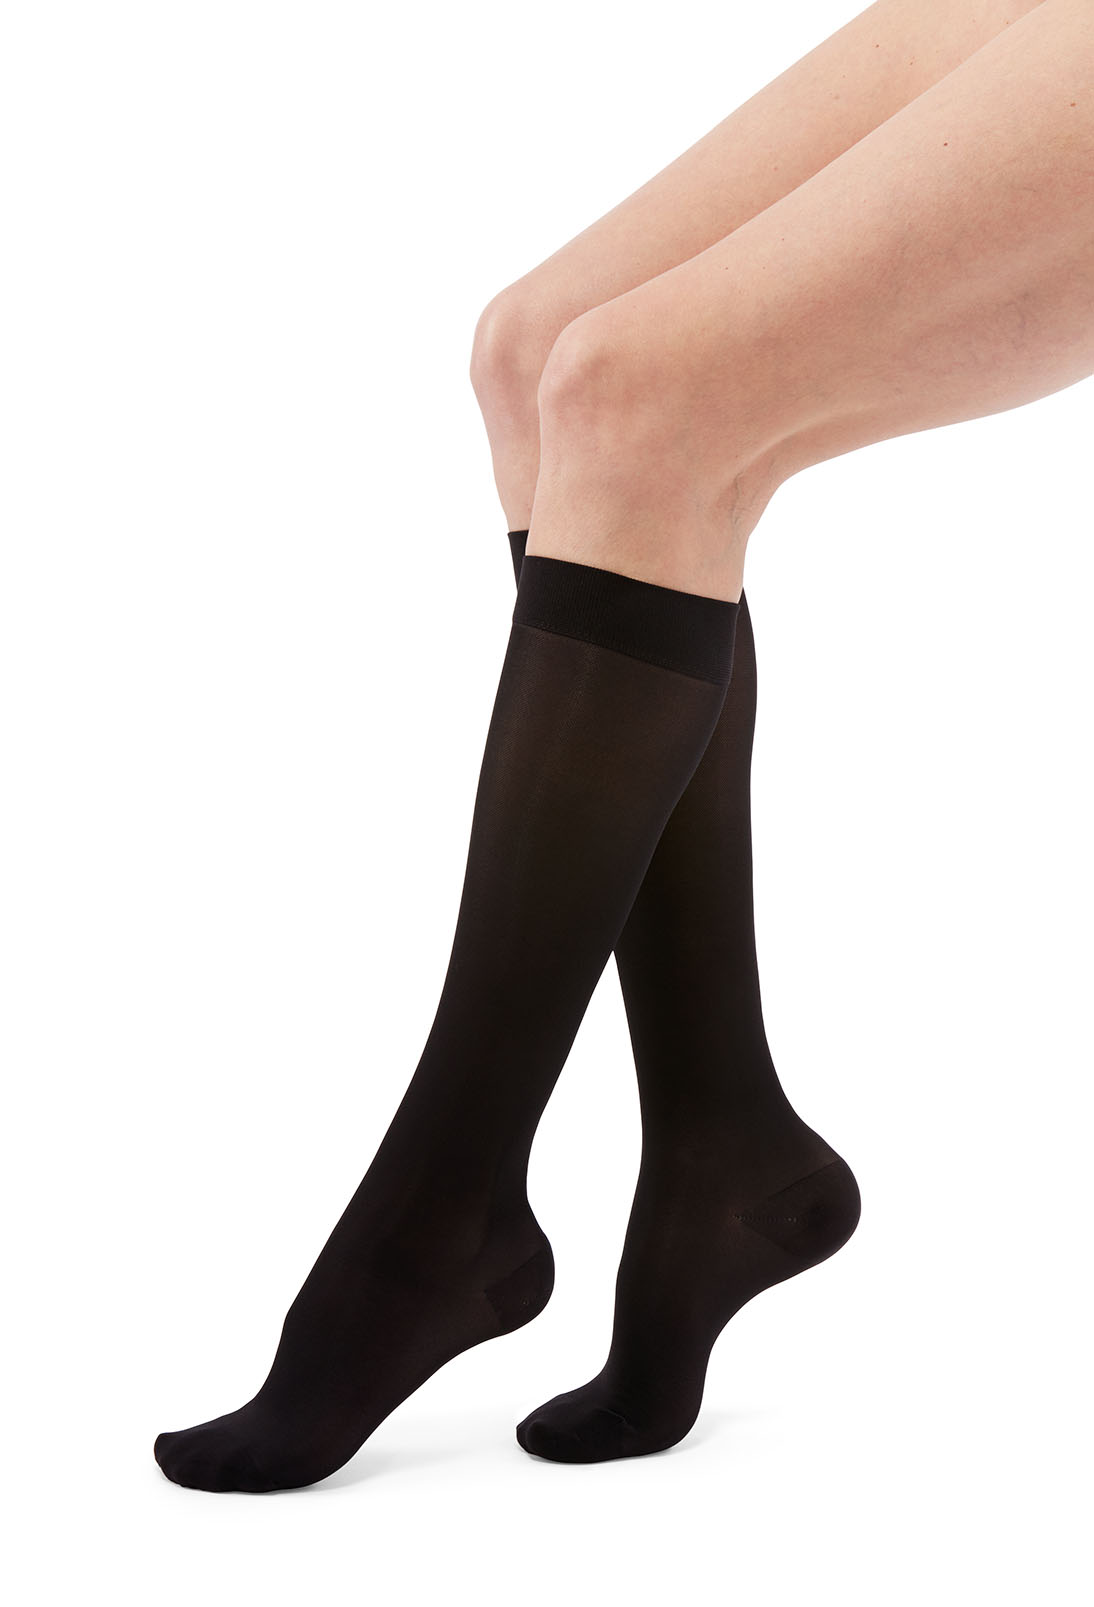 duomed transparent below knee compression stockings – P&H Services